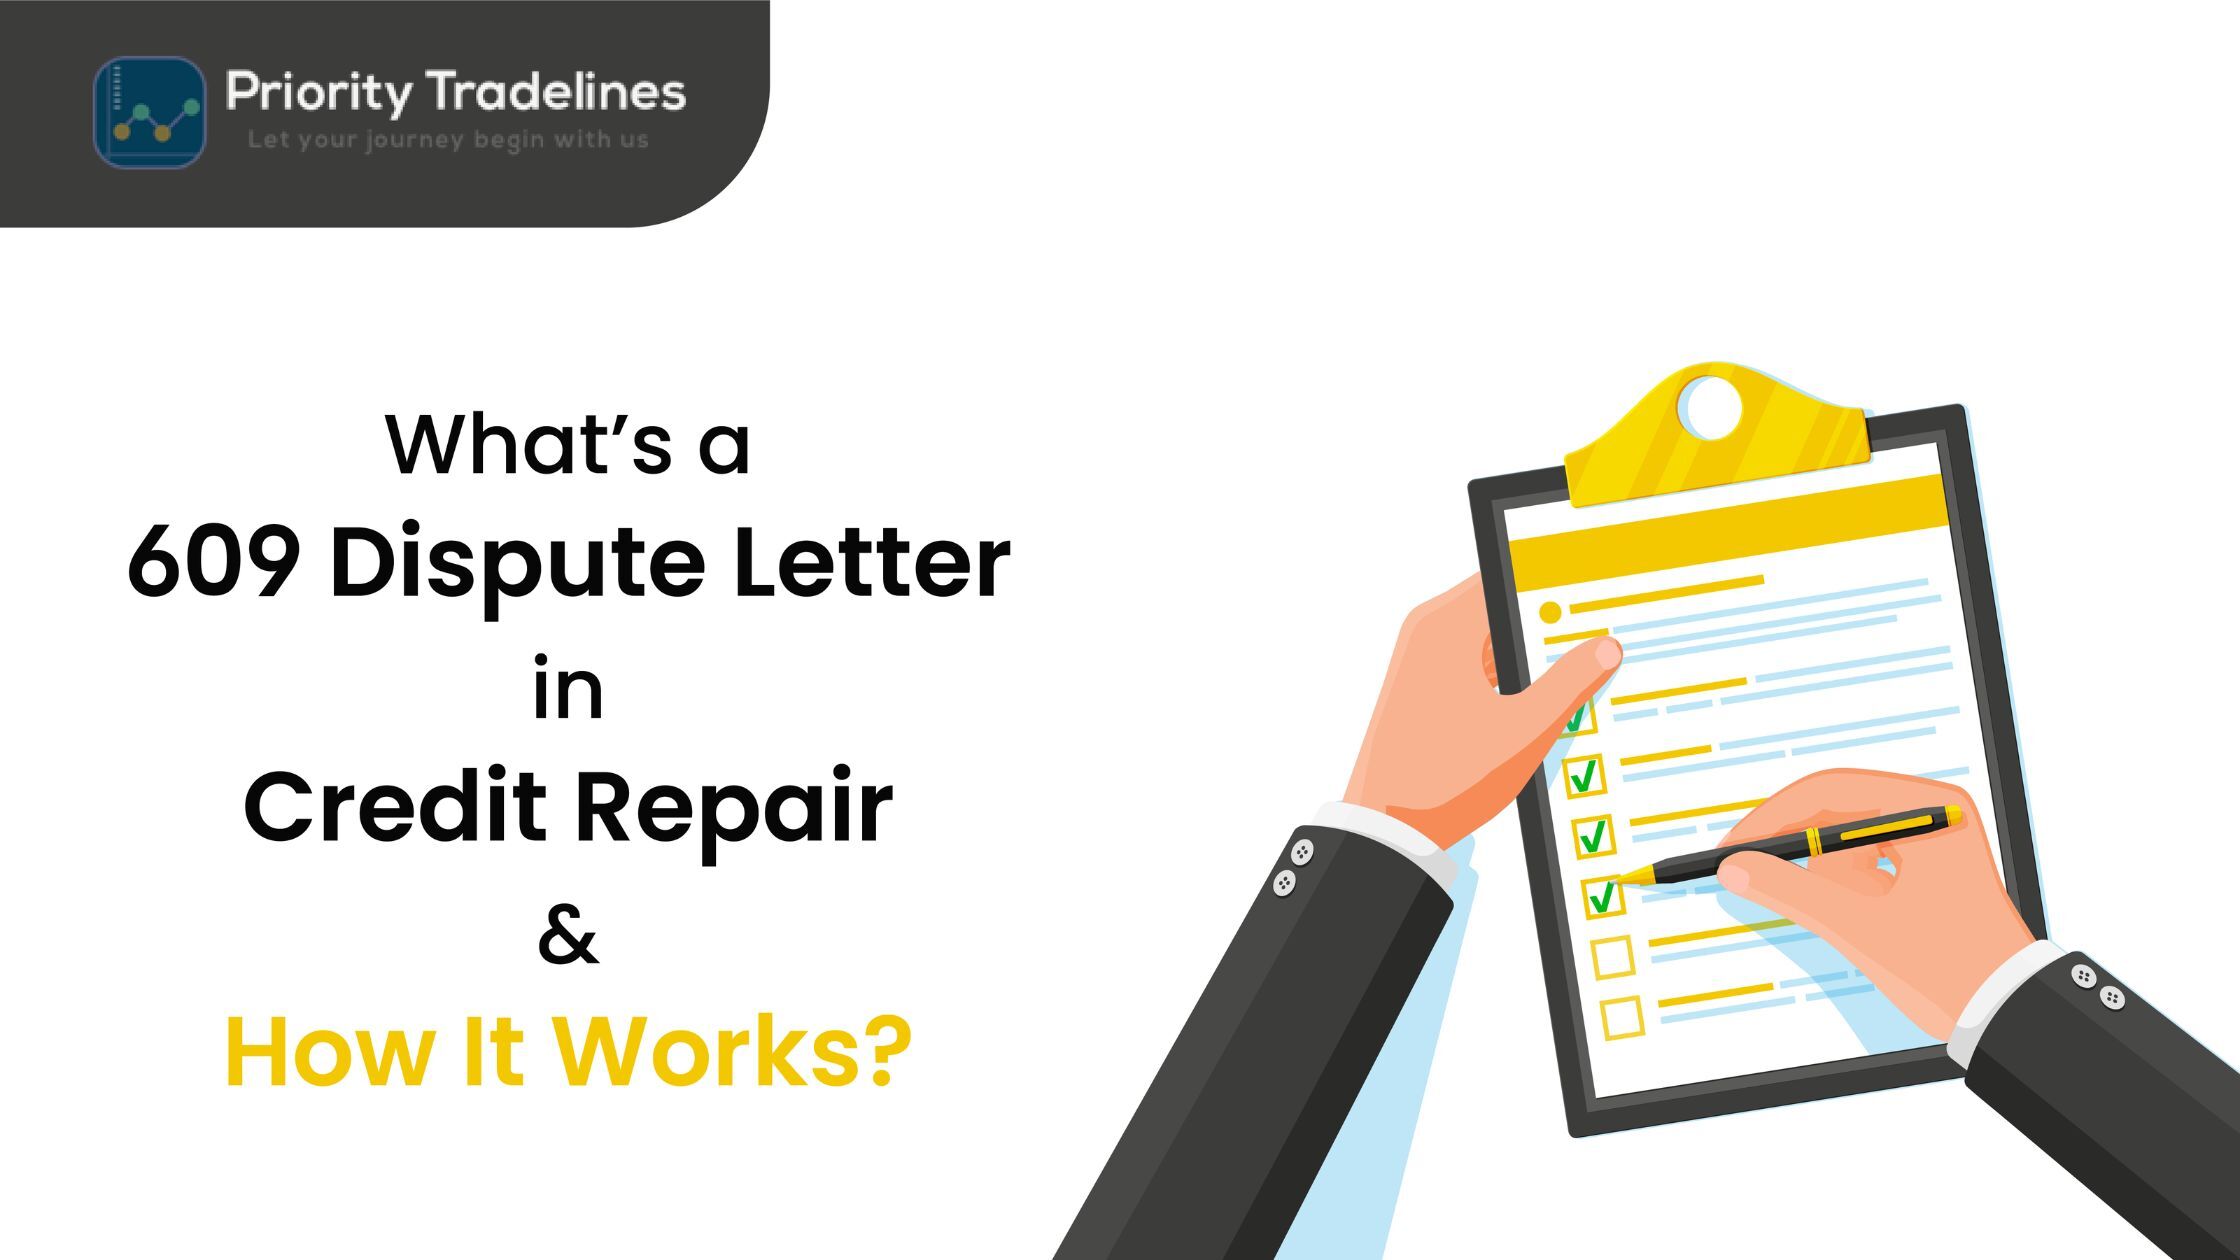 What’s a 609 Dispute Letter in Credit Repair & How It Works?